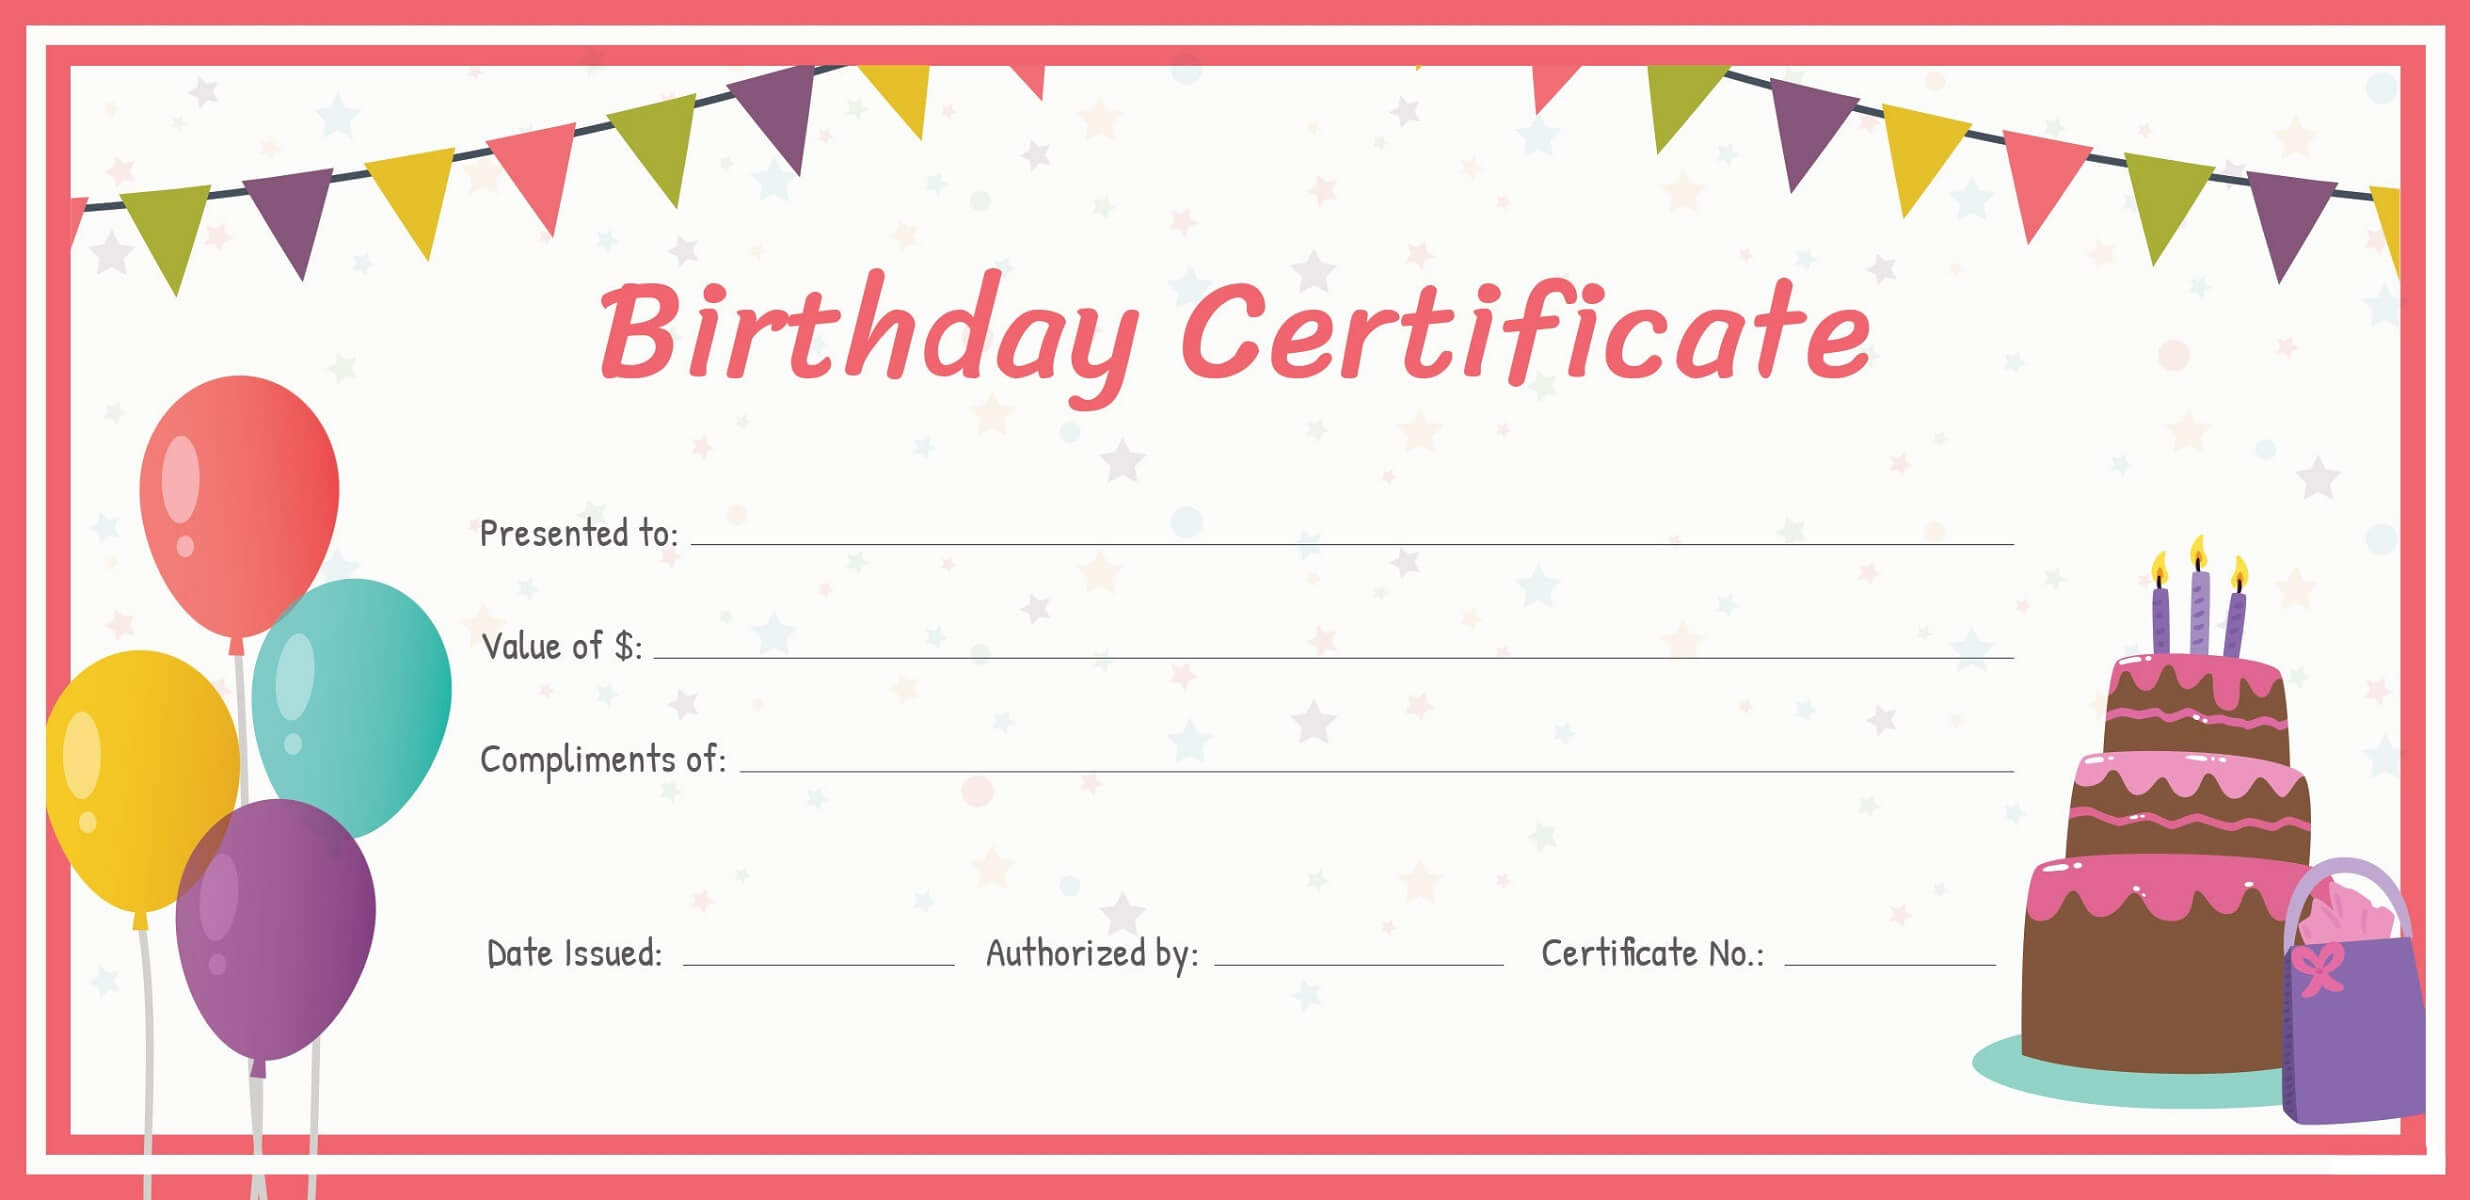 Gift Certificate Templates To Print For Free 101 Activity With